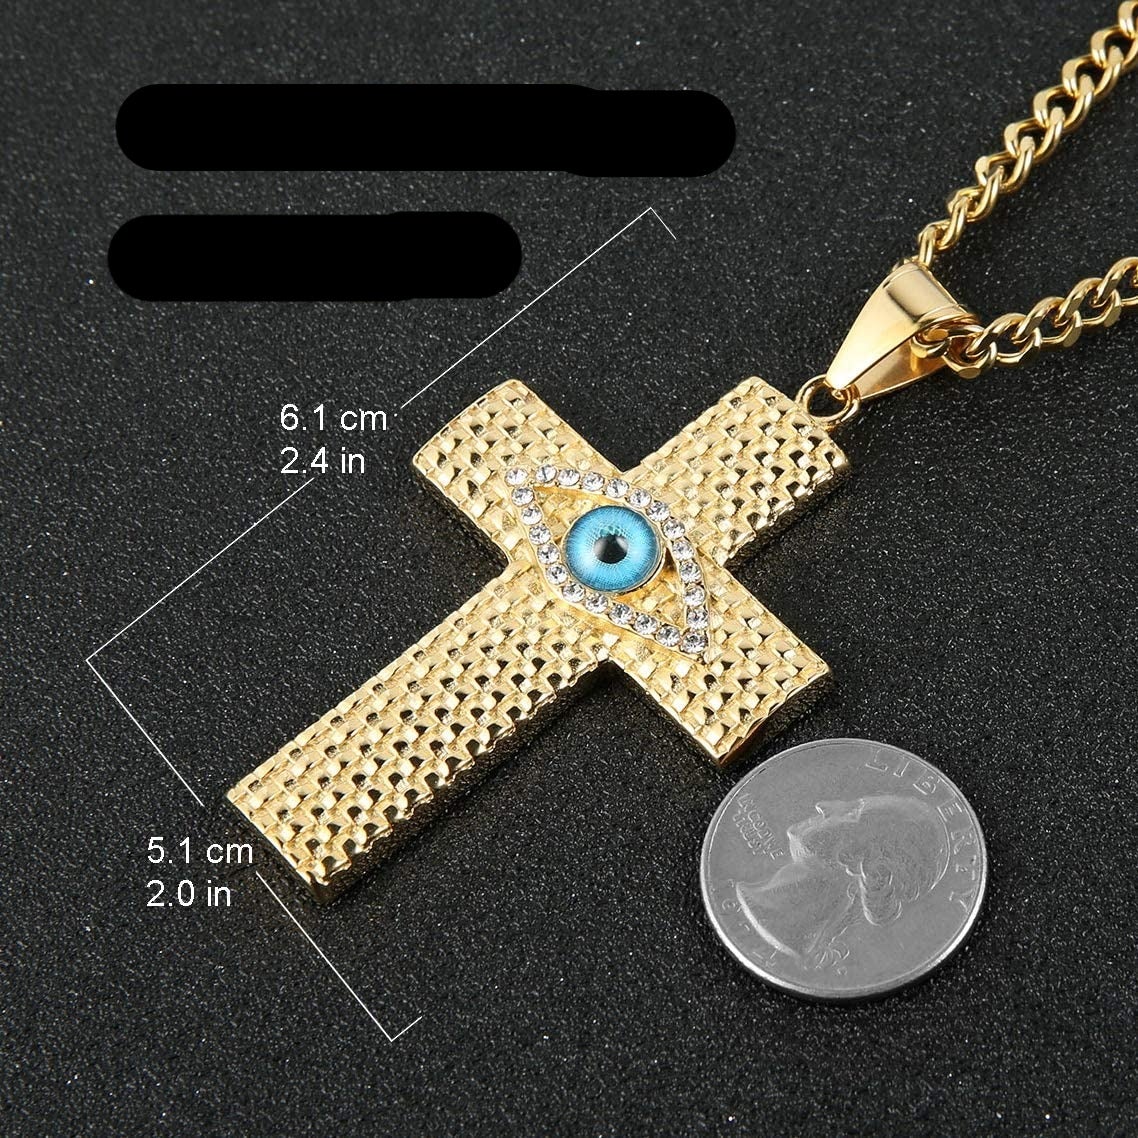 Death Eye Cross Pendant Gold Plated Necklace-silviax